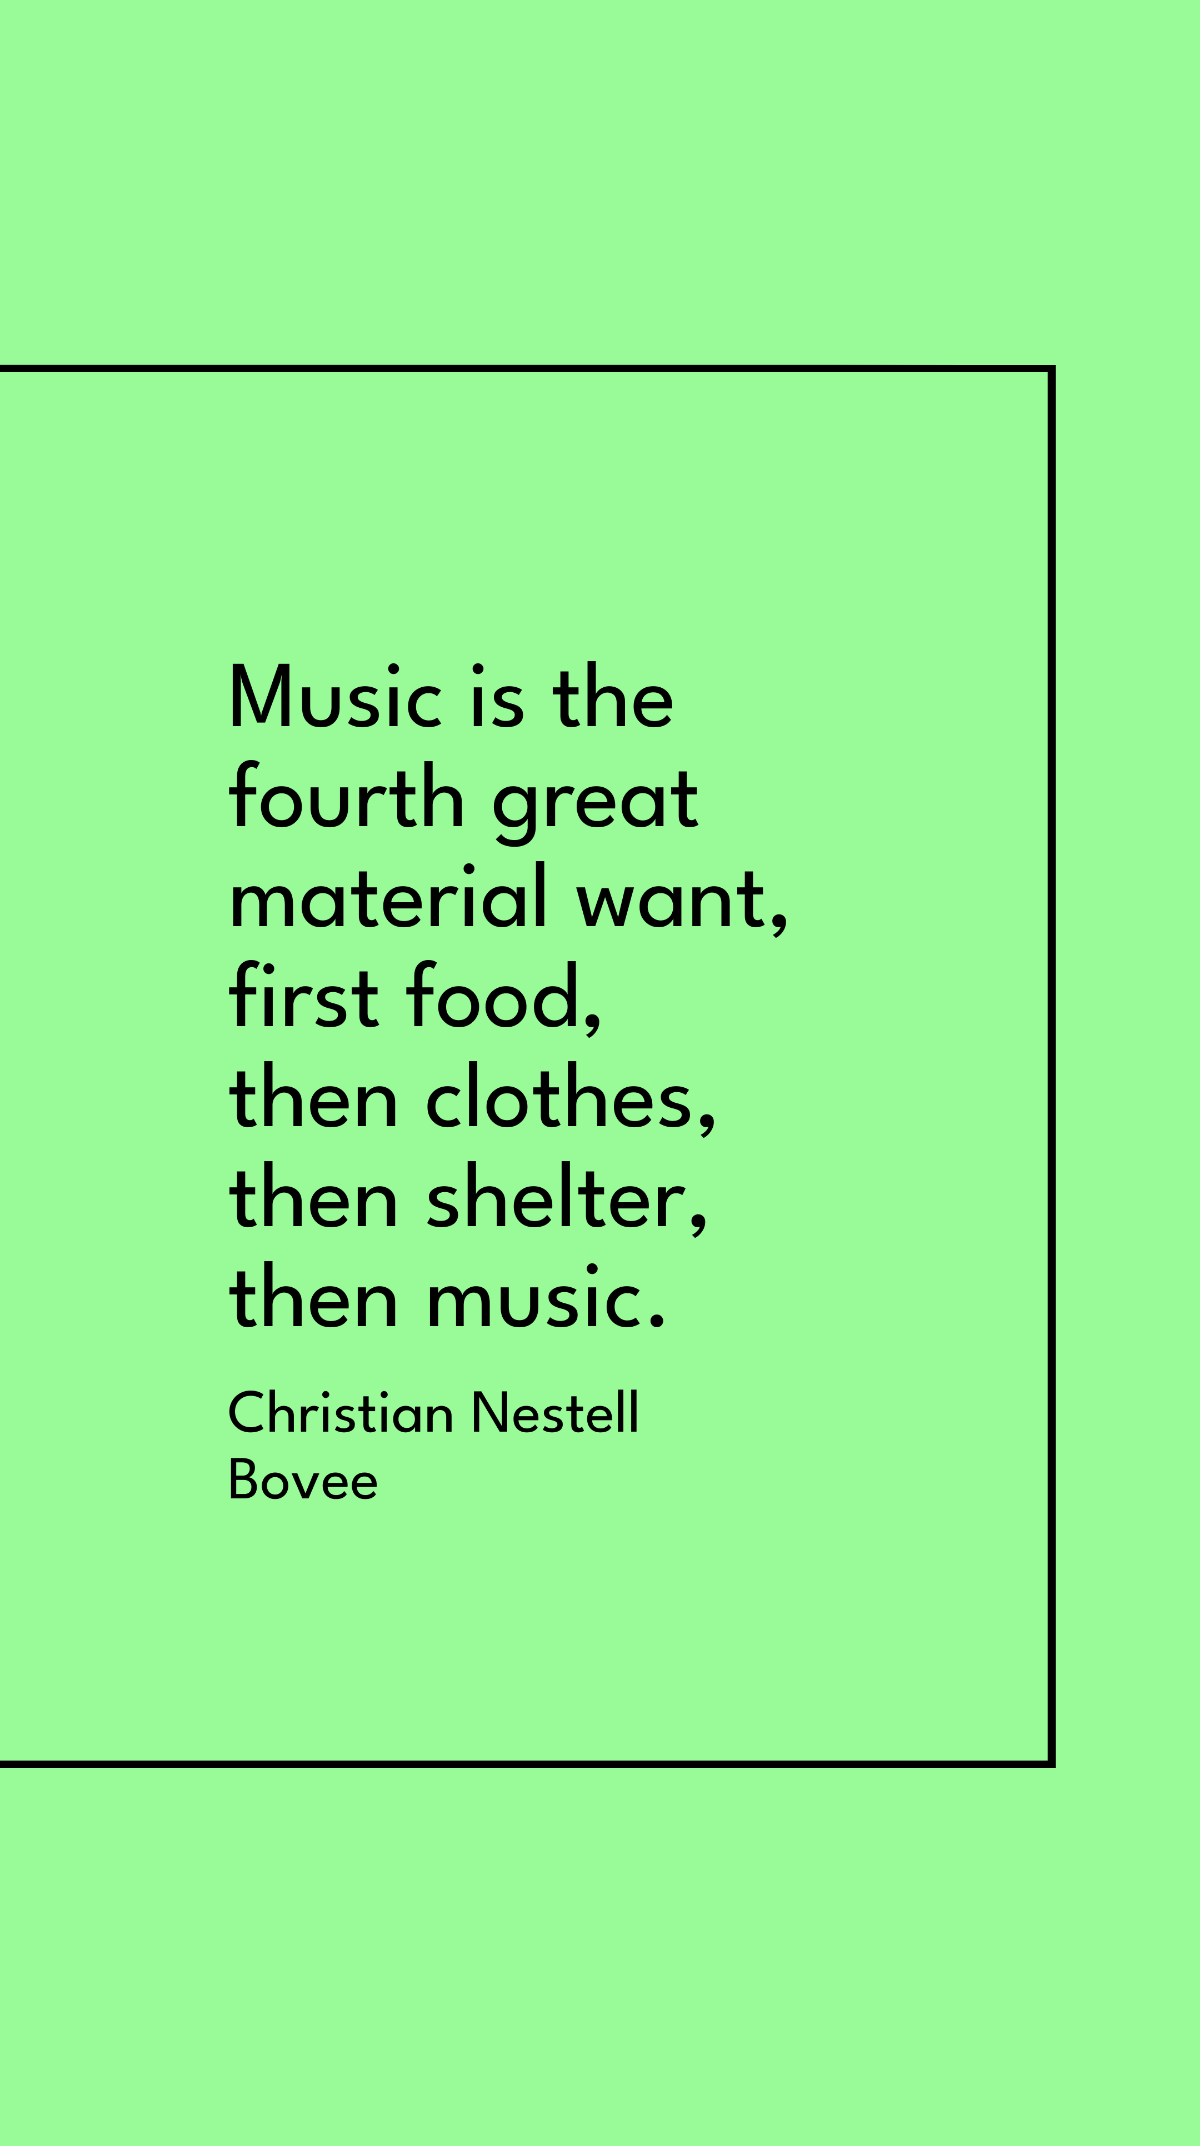 Christian Nestell Bovee - Music is the fourth great material want, first food, then clothes, then shelter, then music.